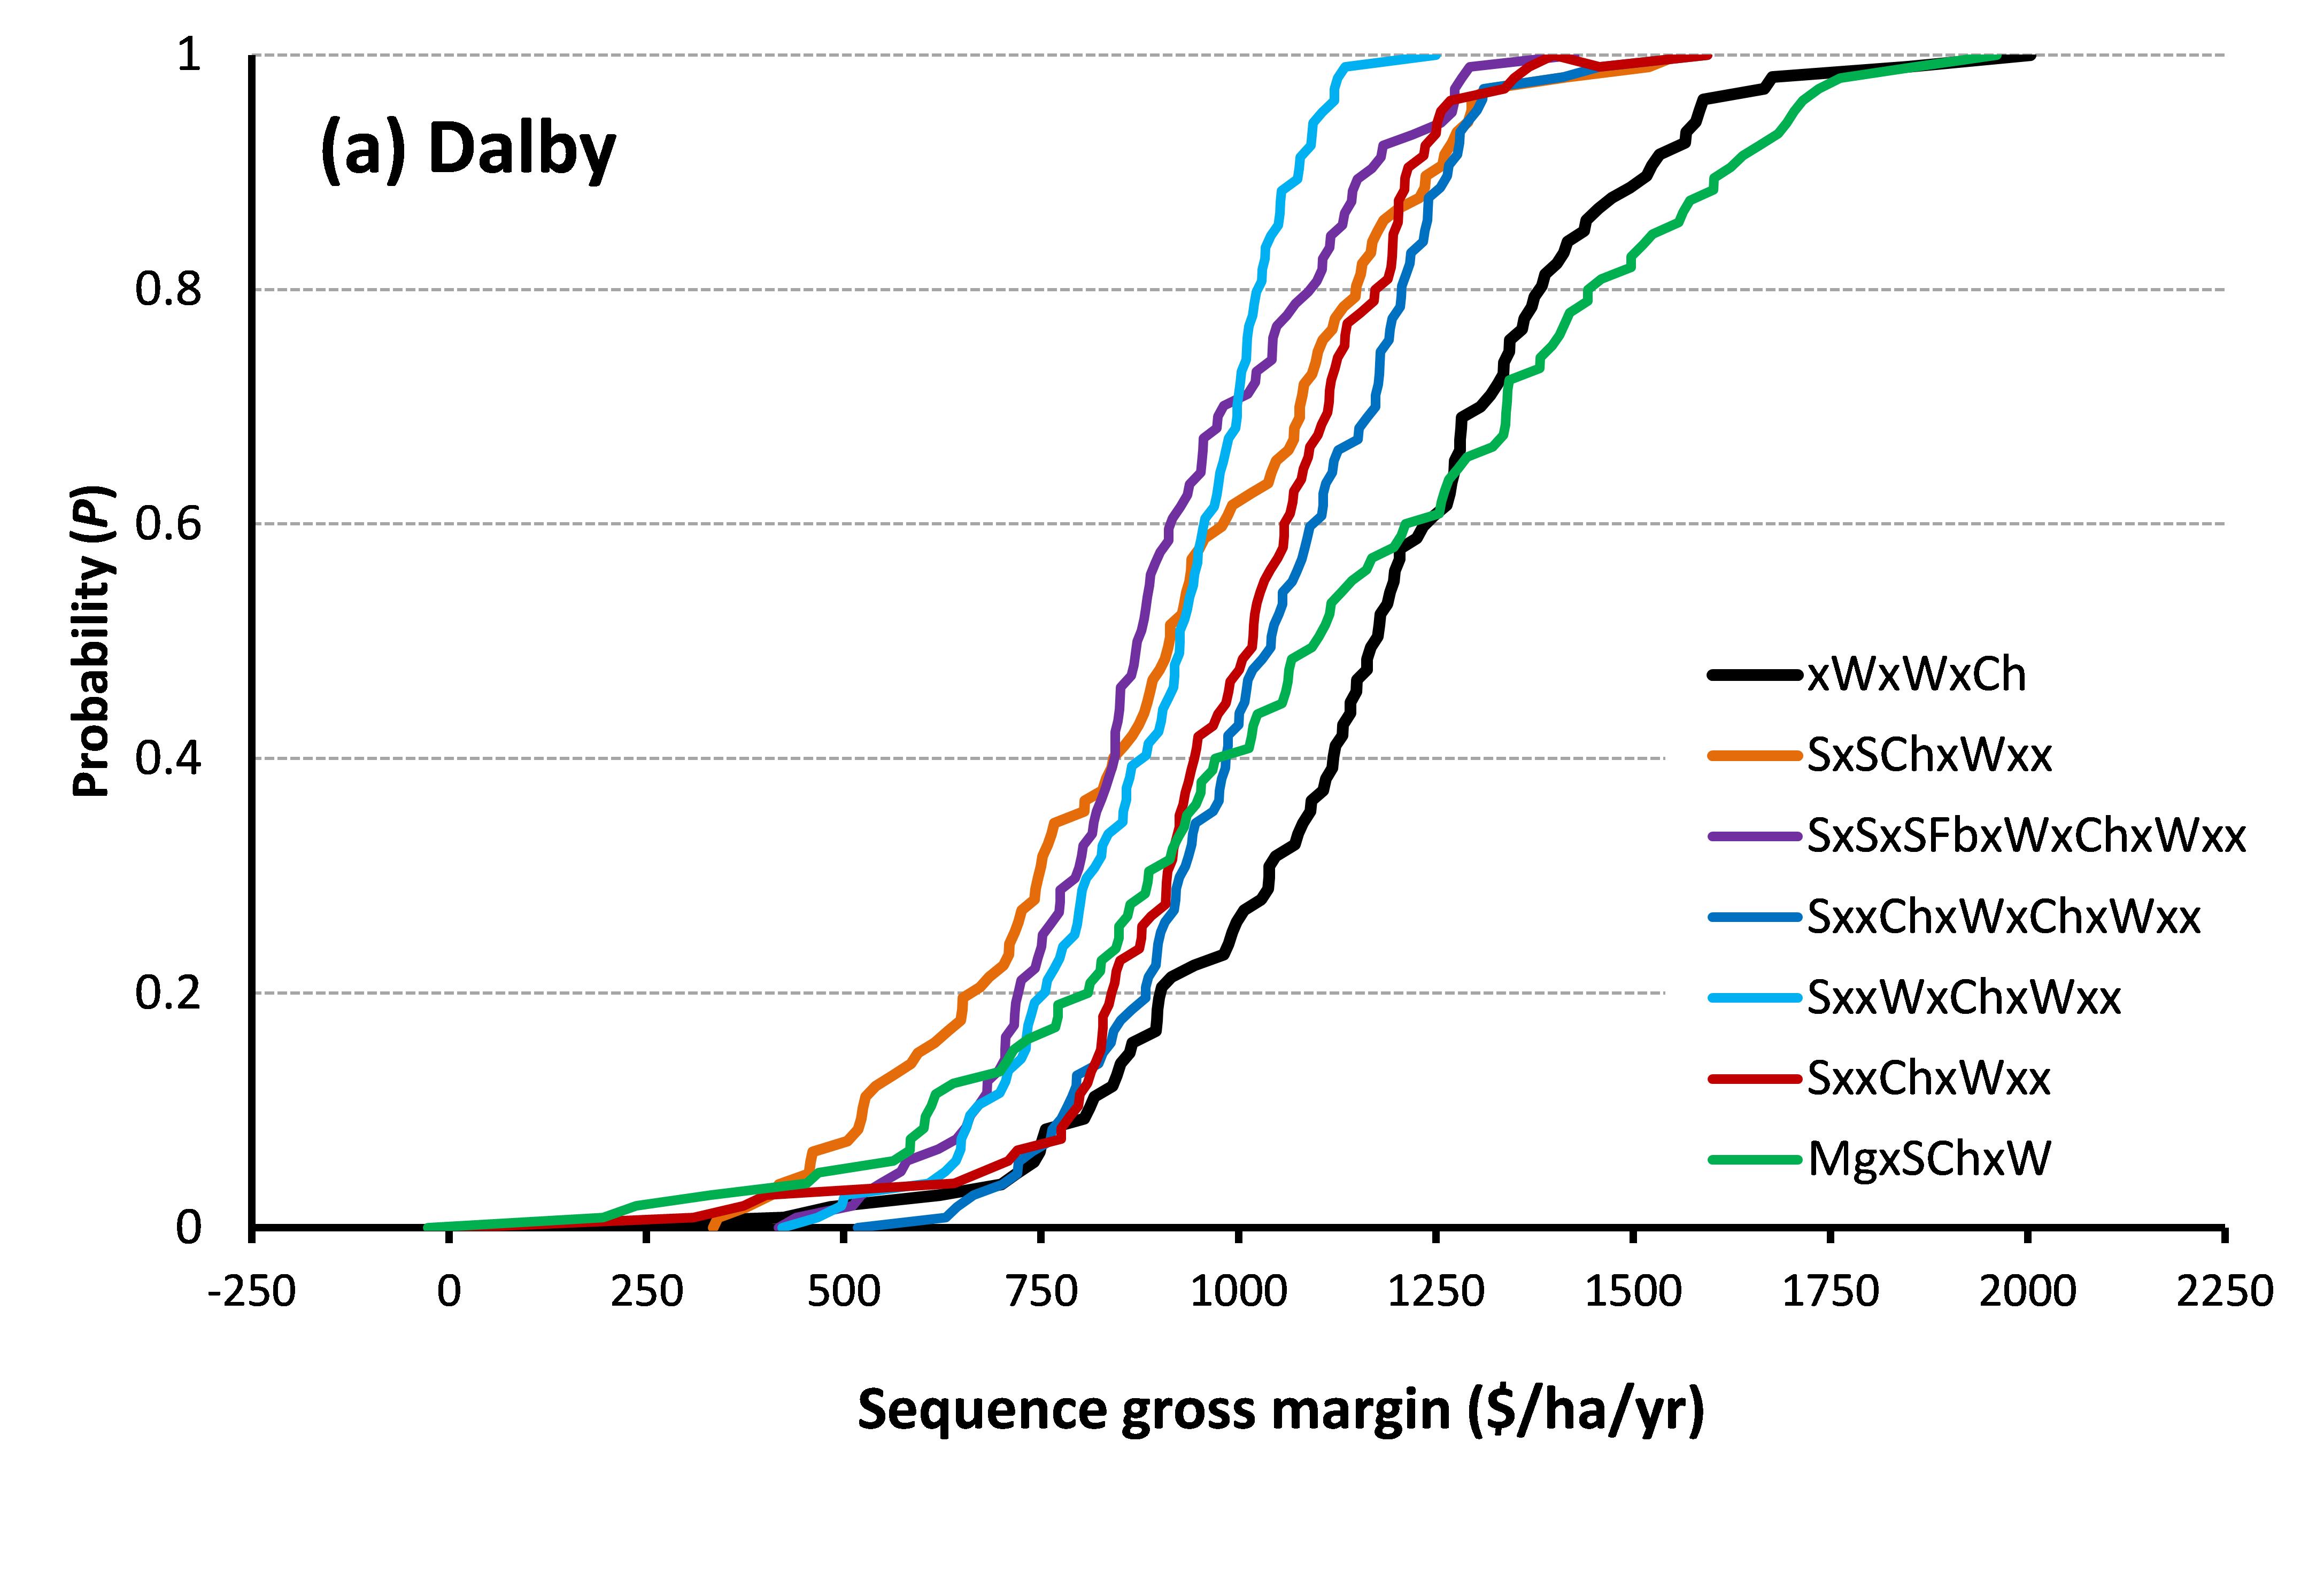 Figure 3a: Cumulative probability of crop sequence gross margin at Dalby